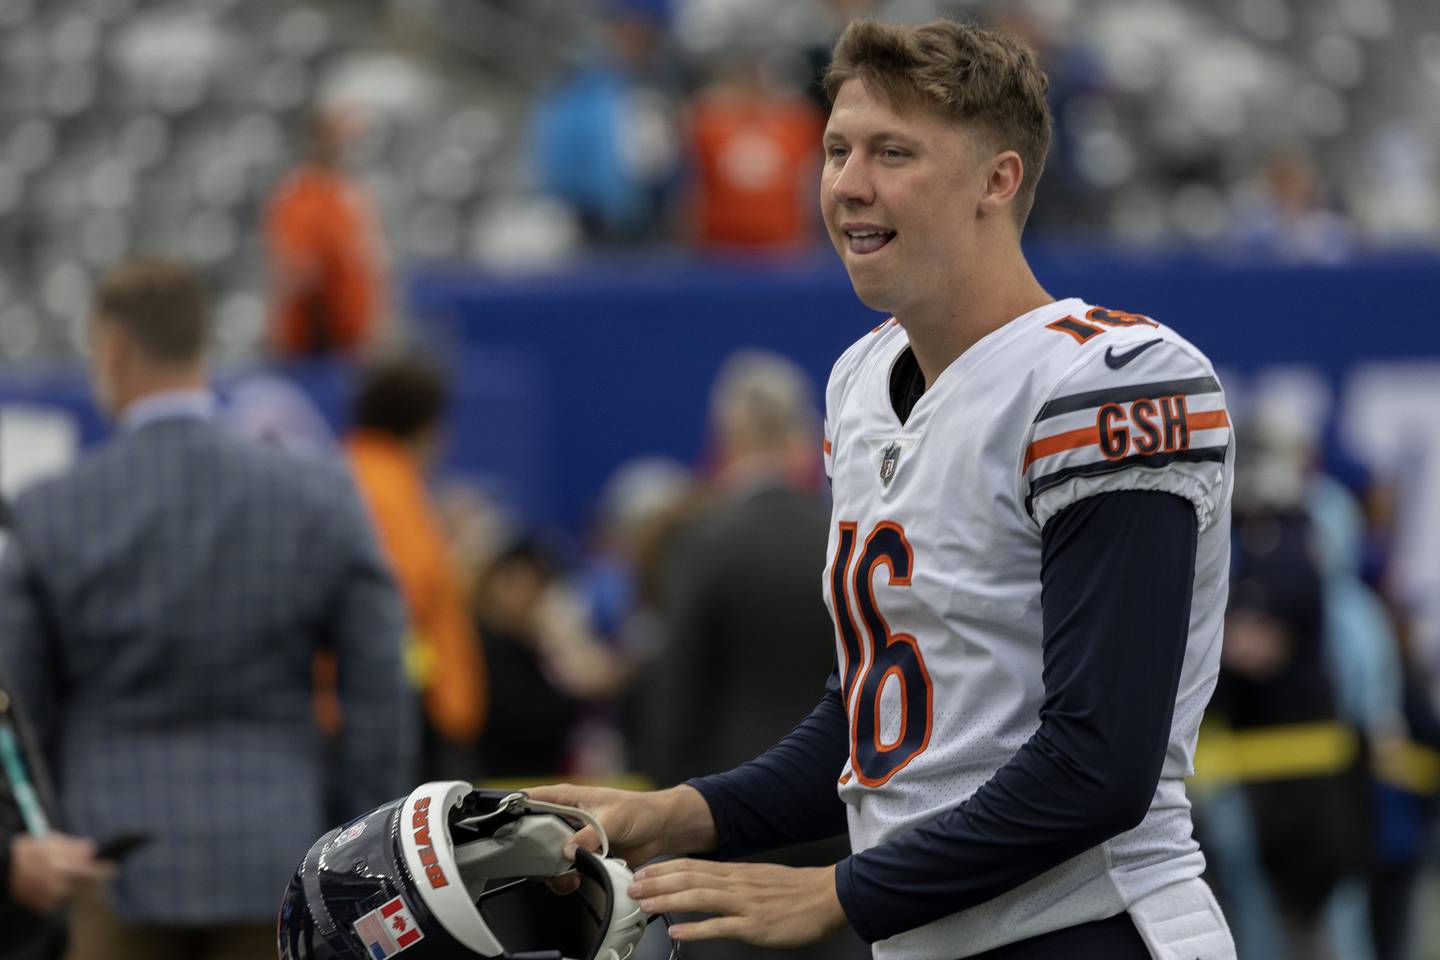 Bears punter Trenton Gill warms up before a game against the Giants on Oct. 12, 2022, at MetLife Stadium.